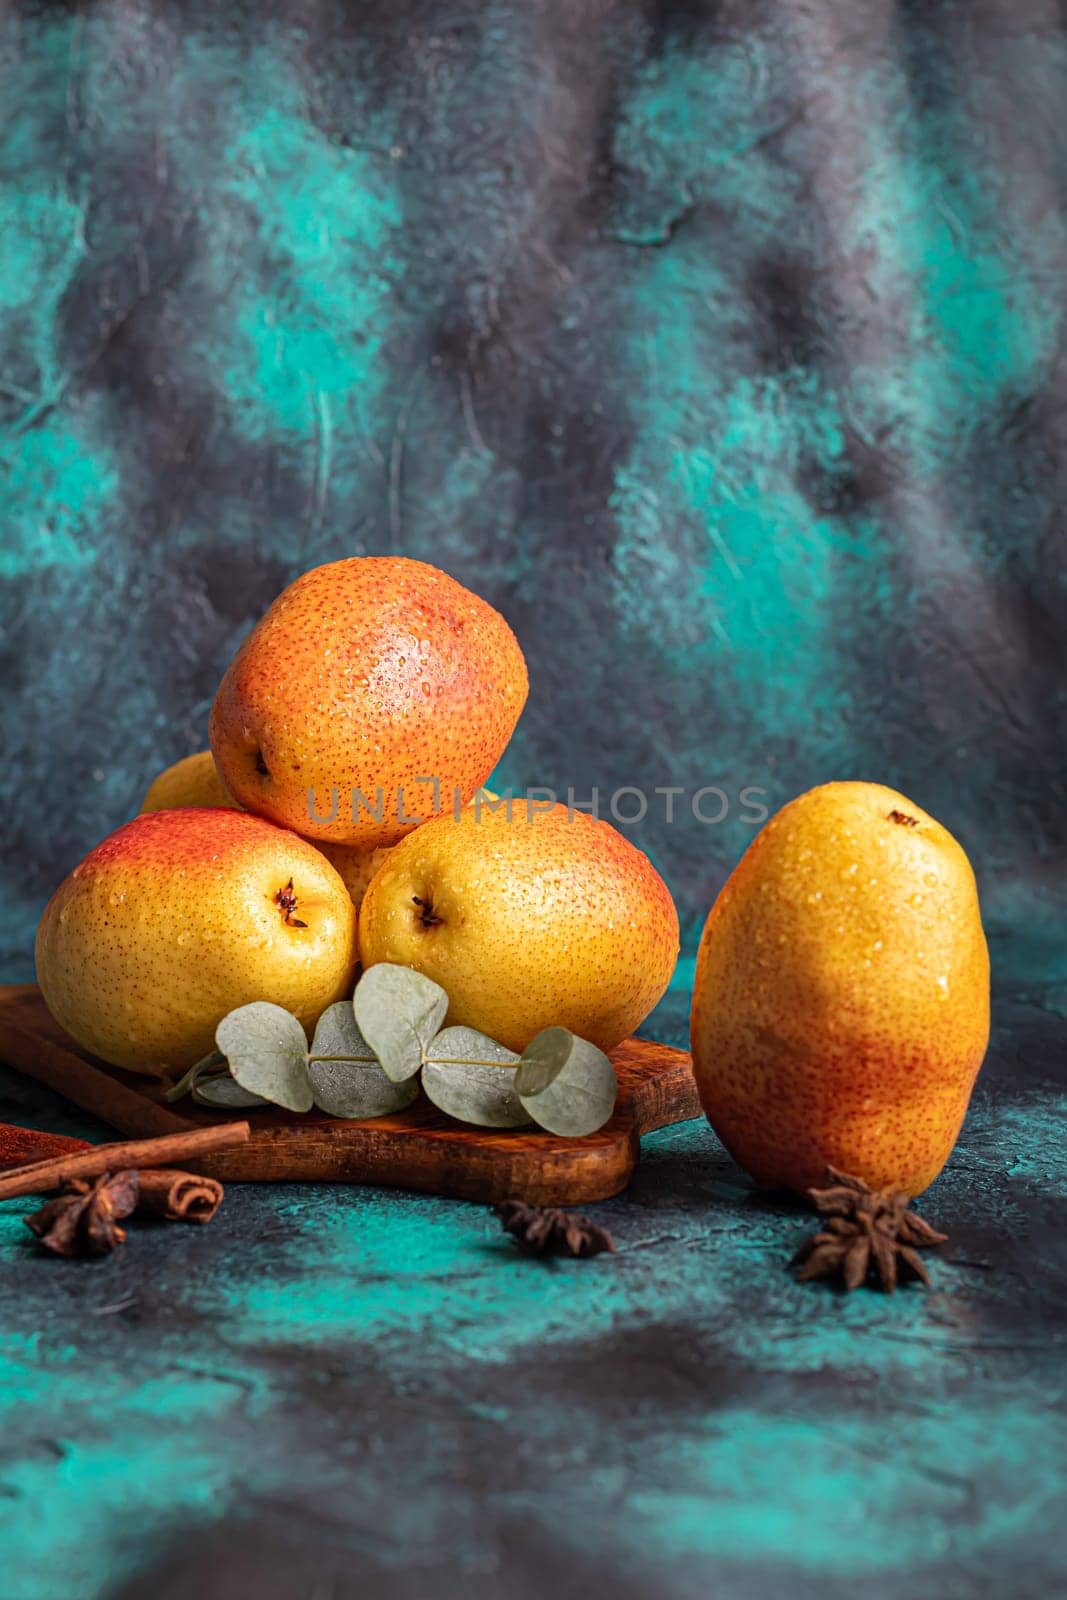 Pears on a dark background. Fresh, ripe fruits on a blue plate and in a box. Healthy eating. Copy space.